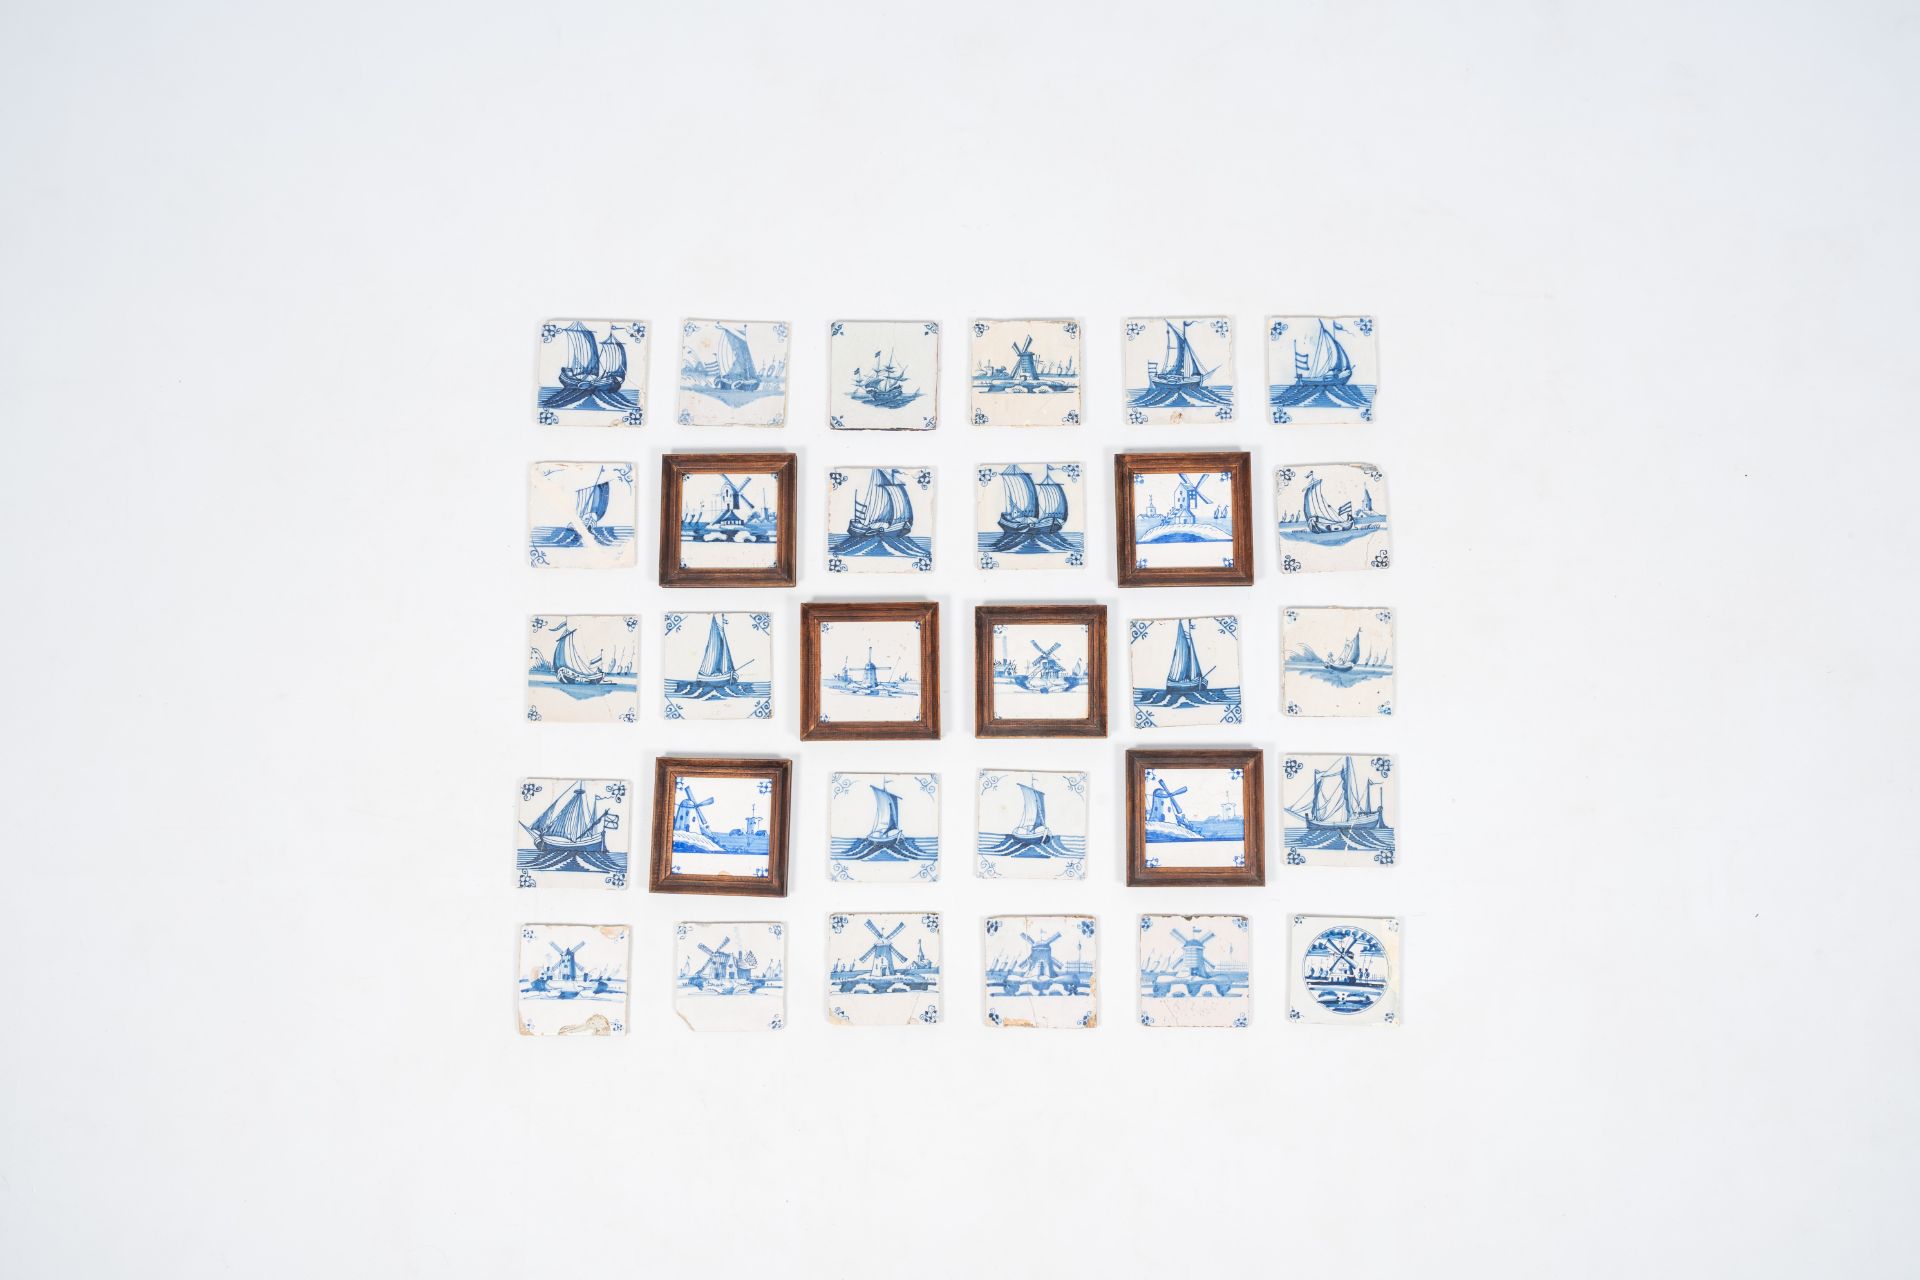 30 blue and white Dutch Delft tiles with boats and windmills, 18th/19th C.